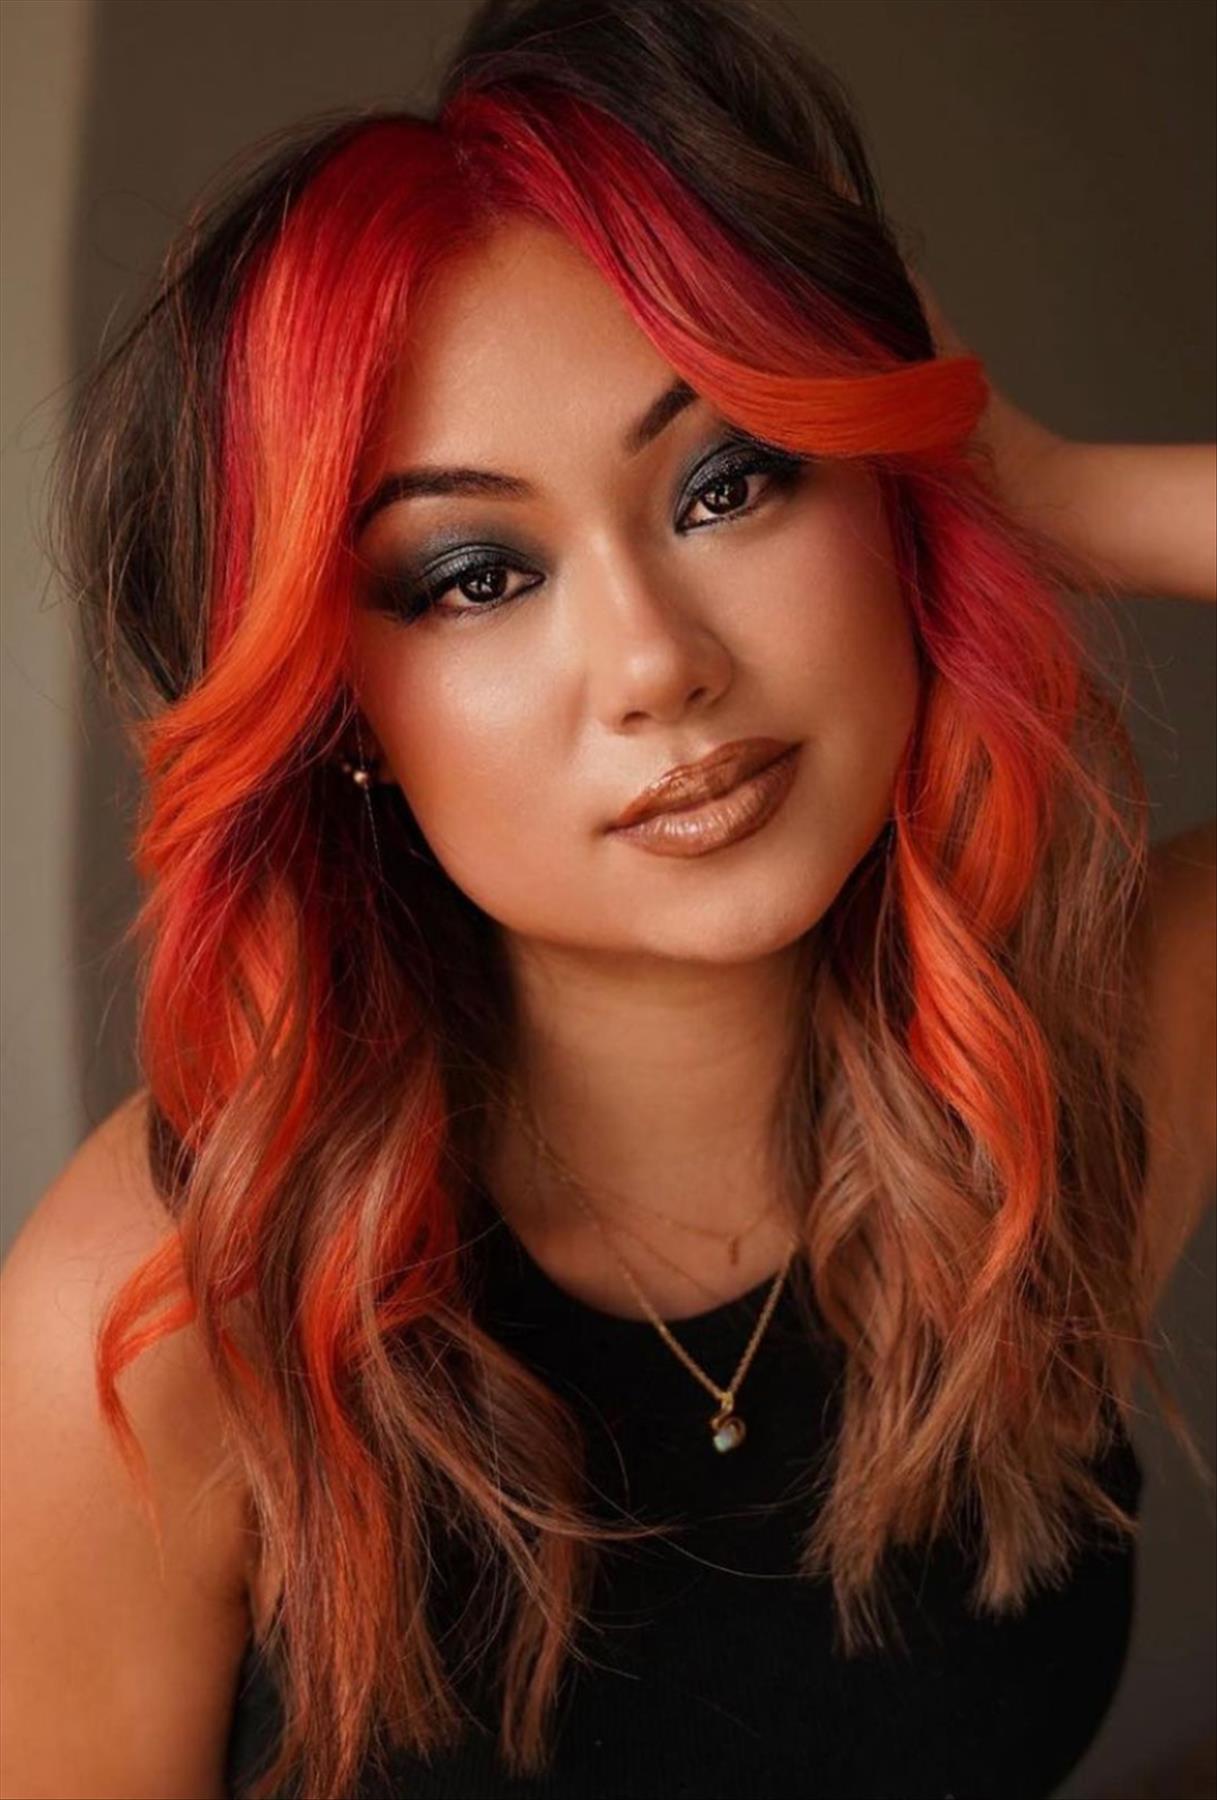 Perfect Winter hair color You’ll Be Dying For 